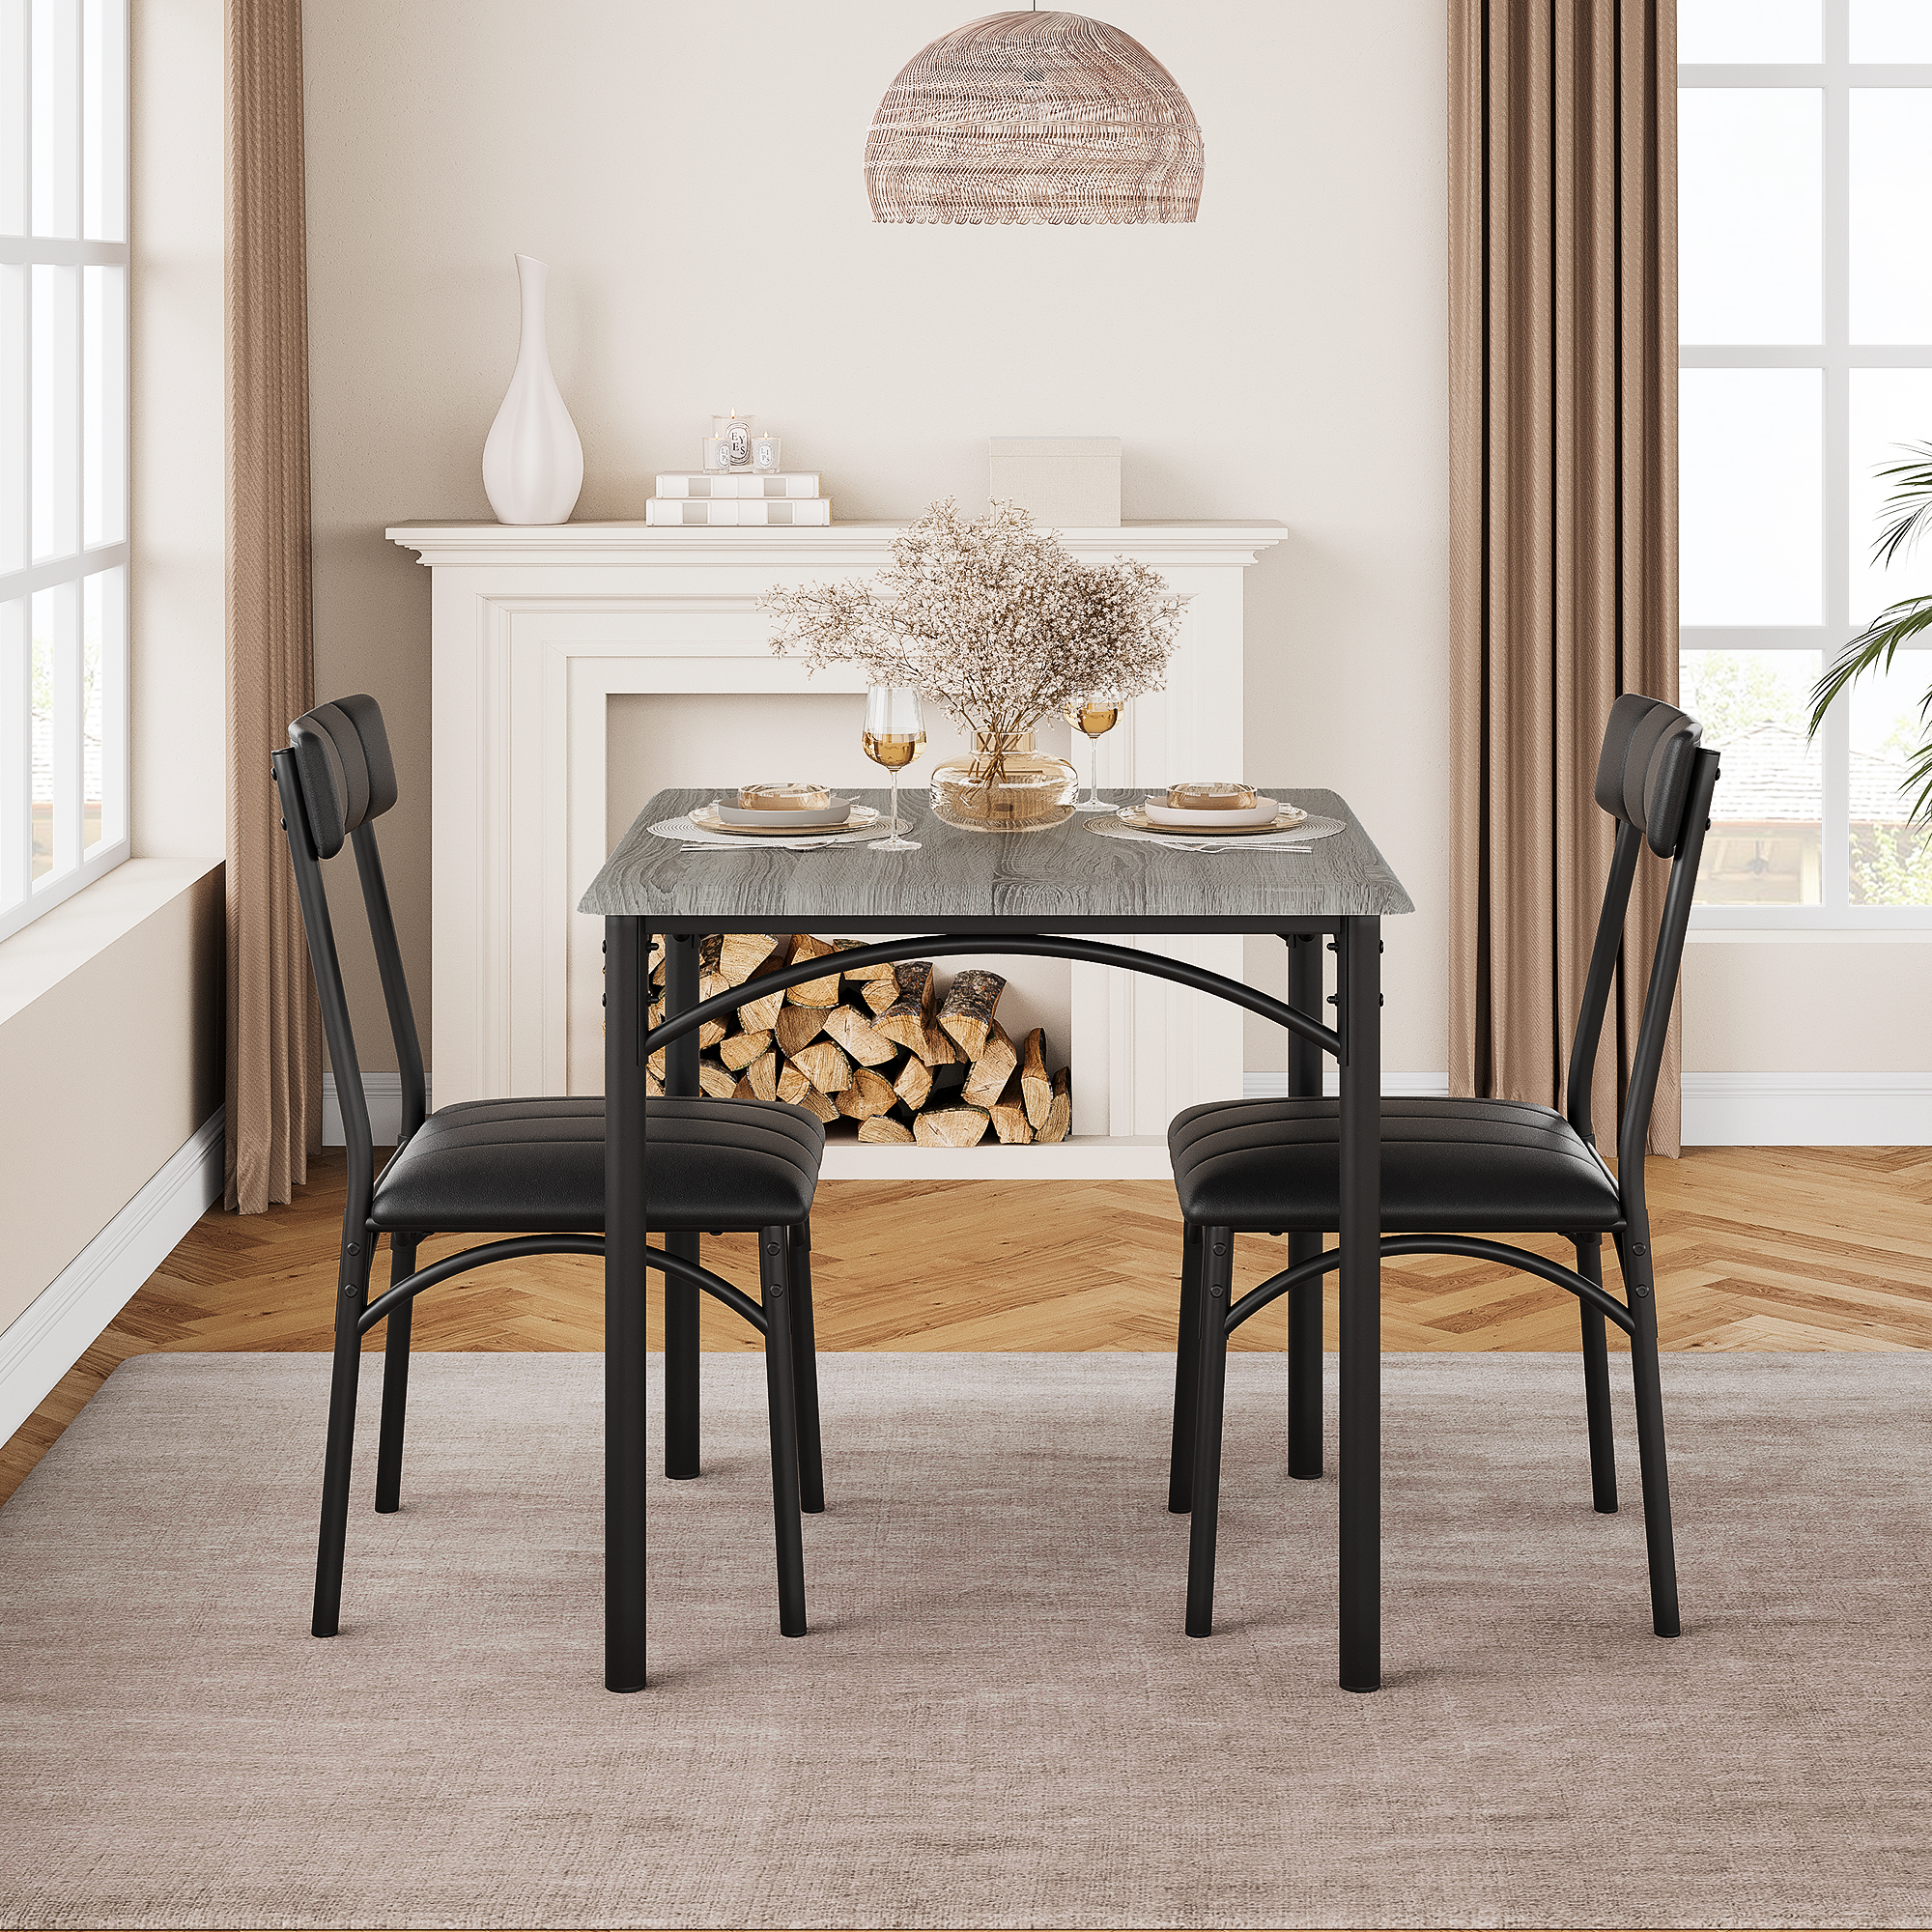 Kitchen Table Chairs Square Dining